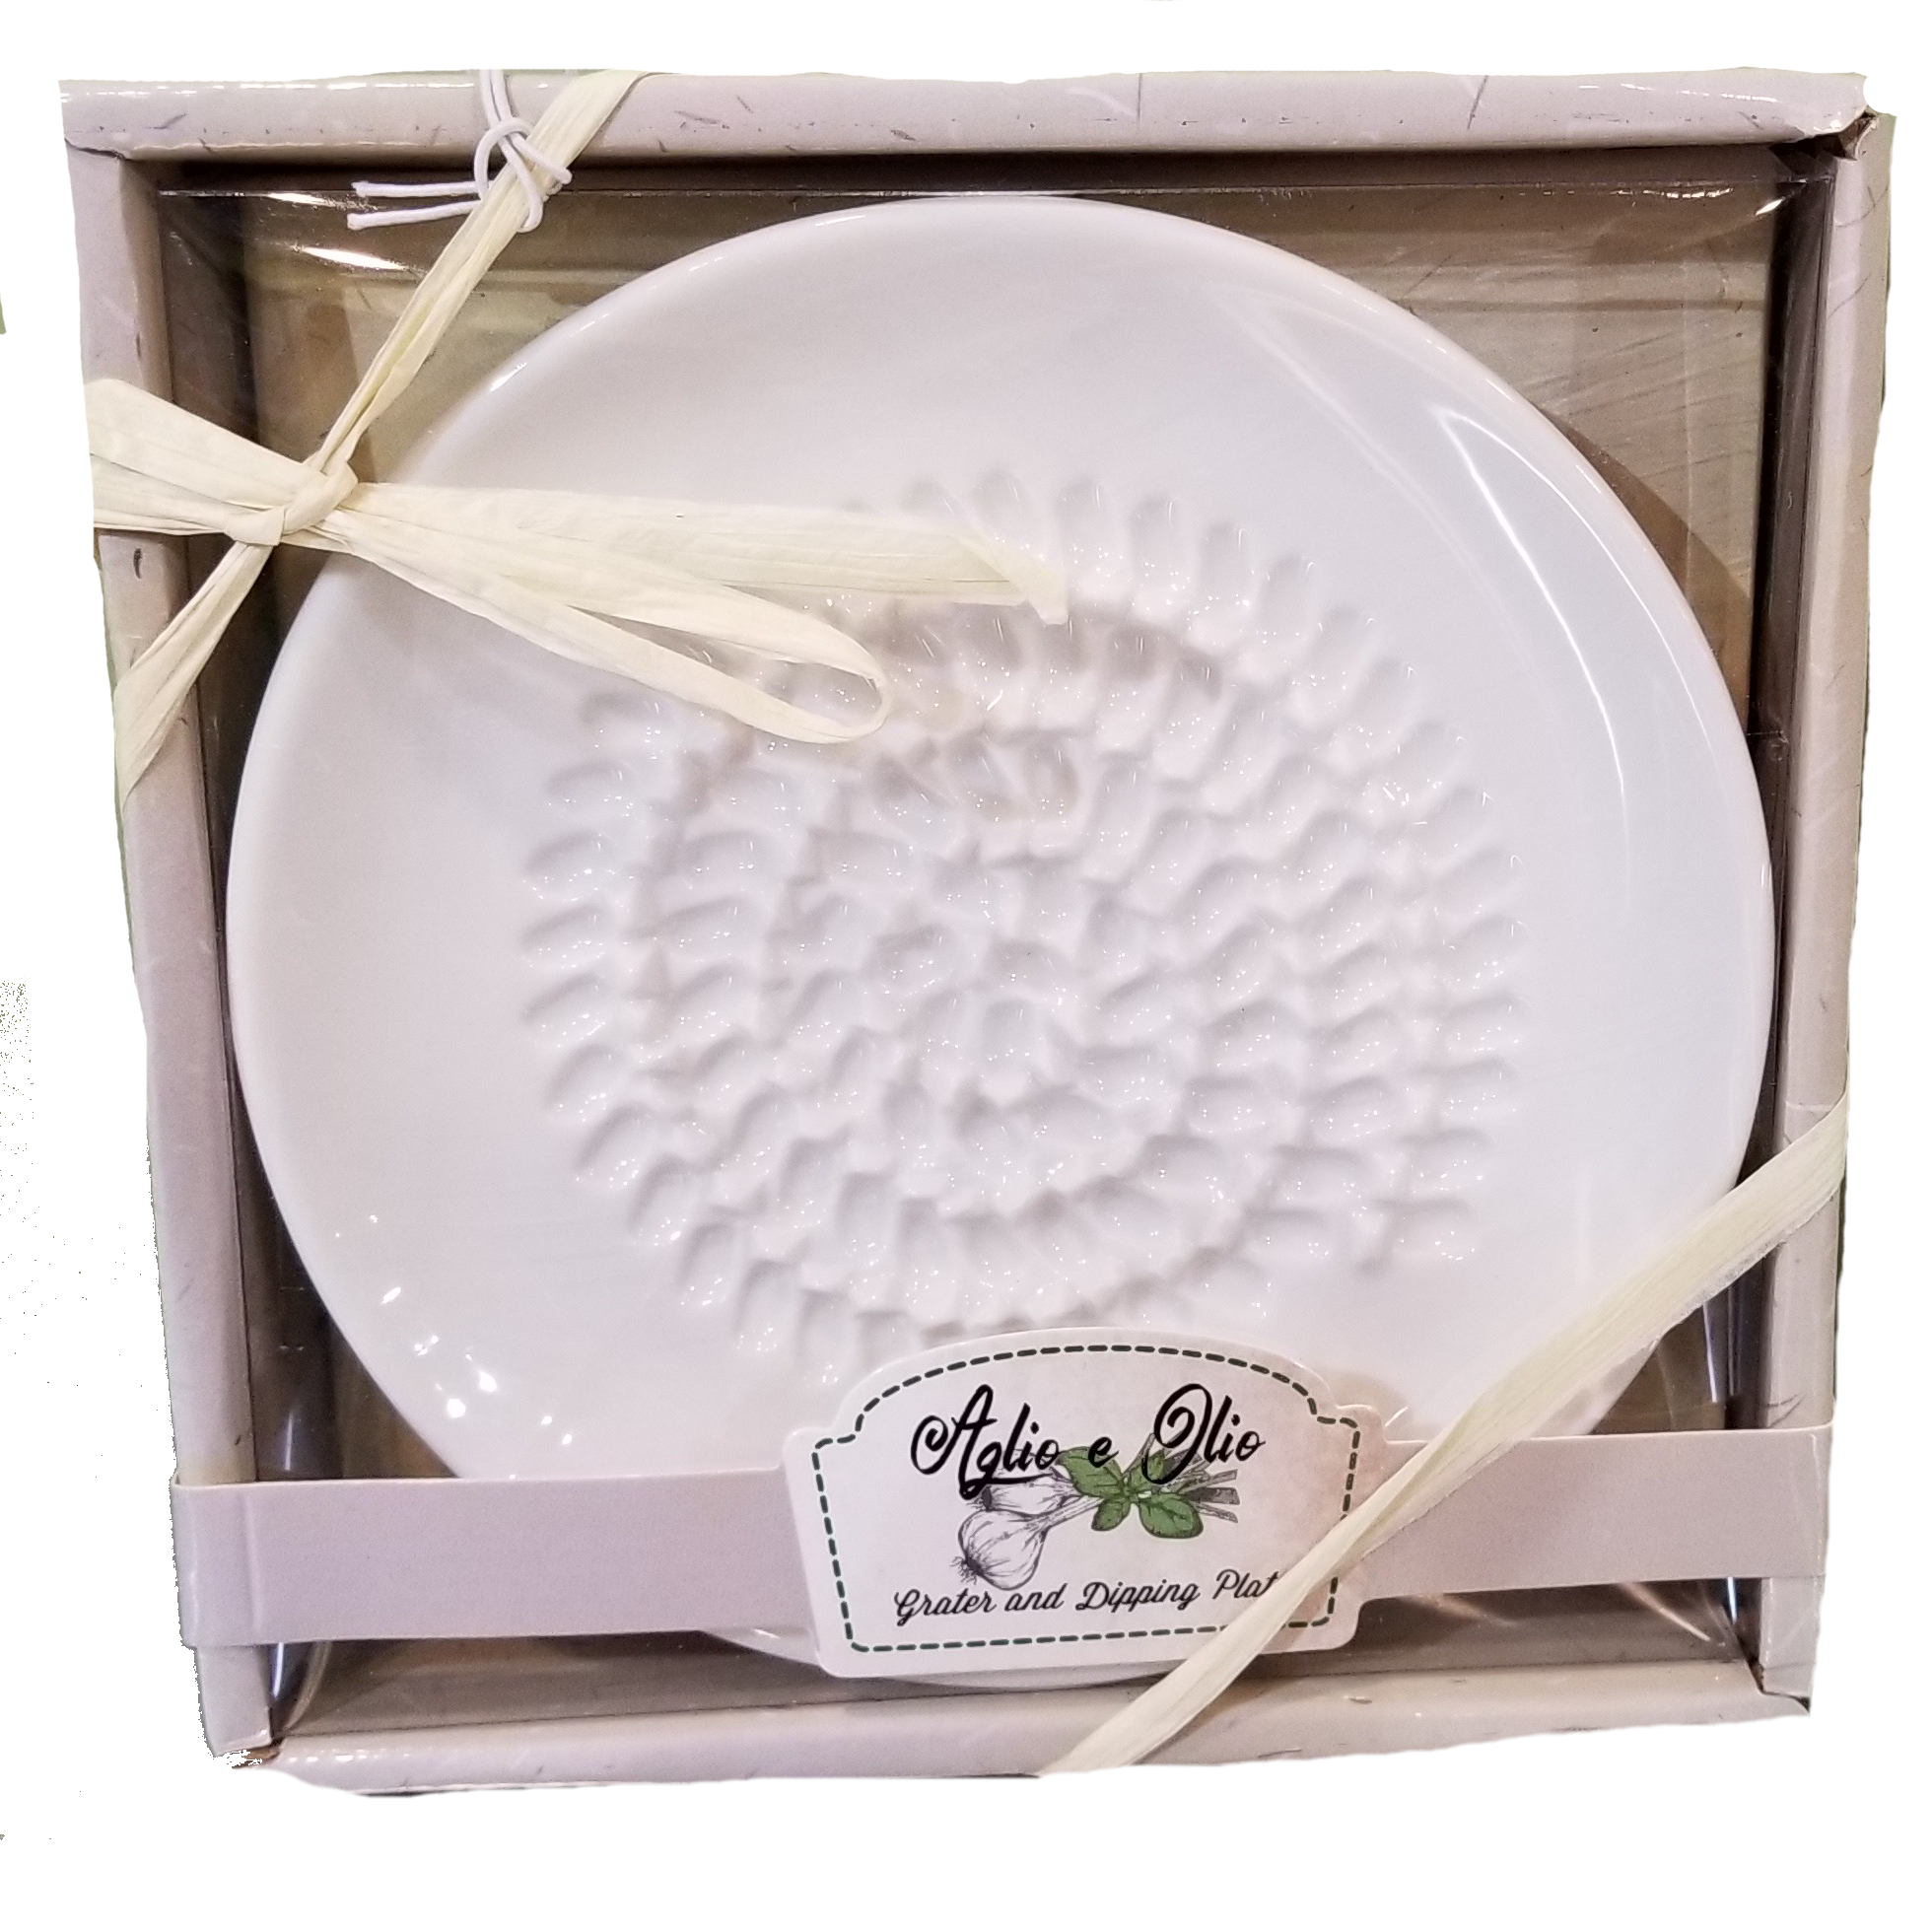 Garlic Grater and Dipping Plate - North Conway Olive Oil Company